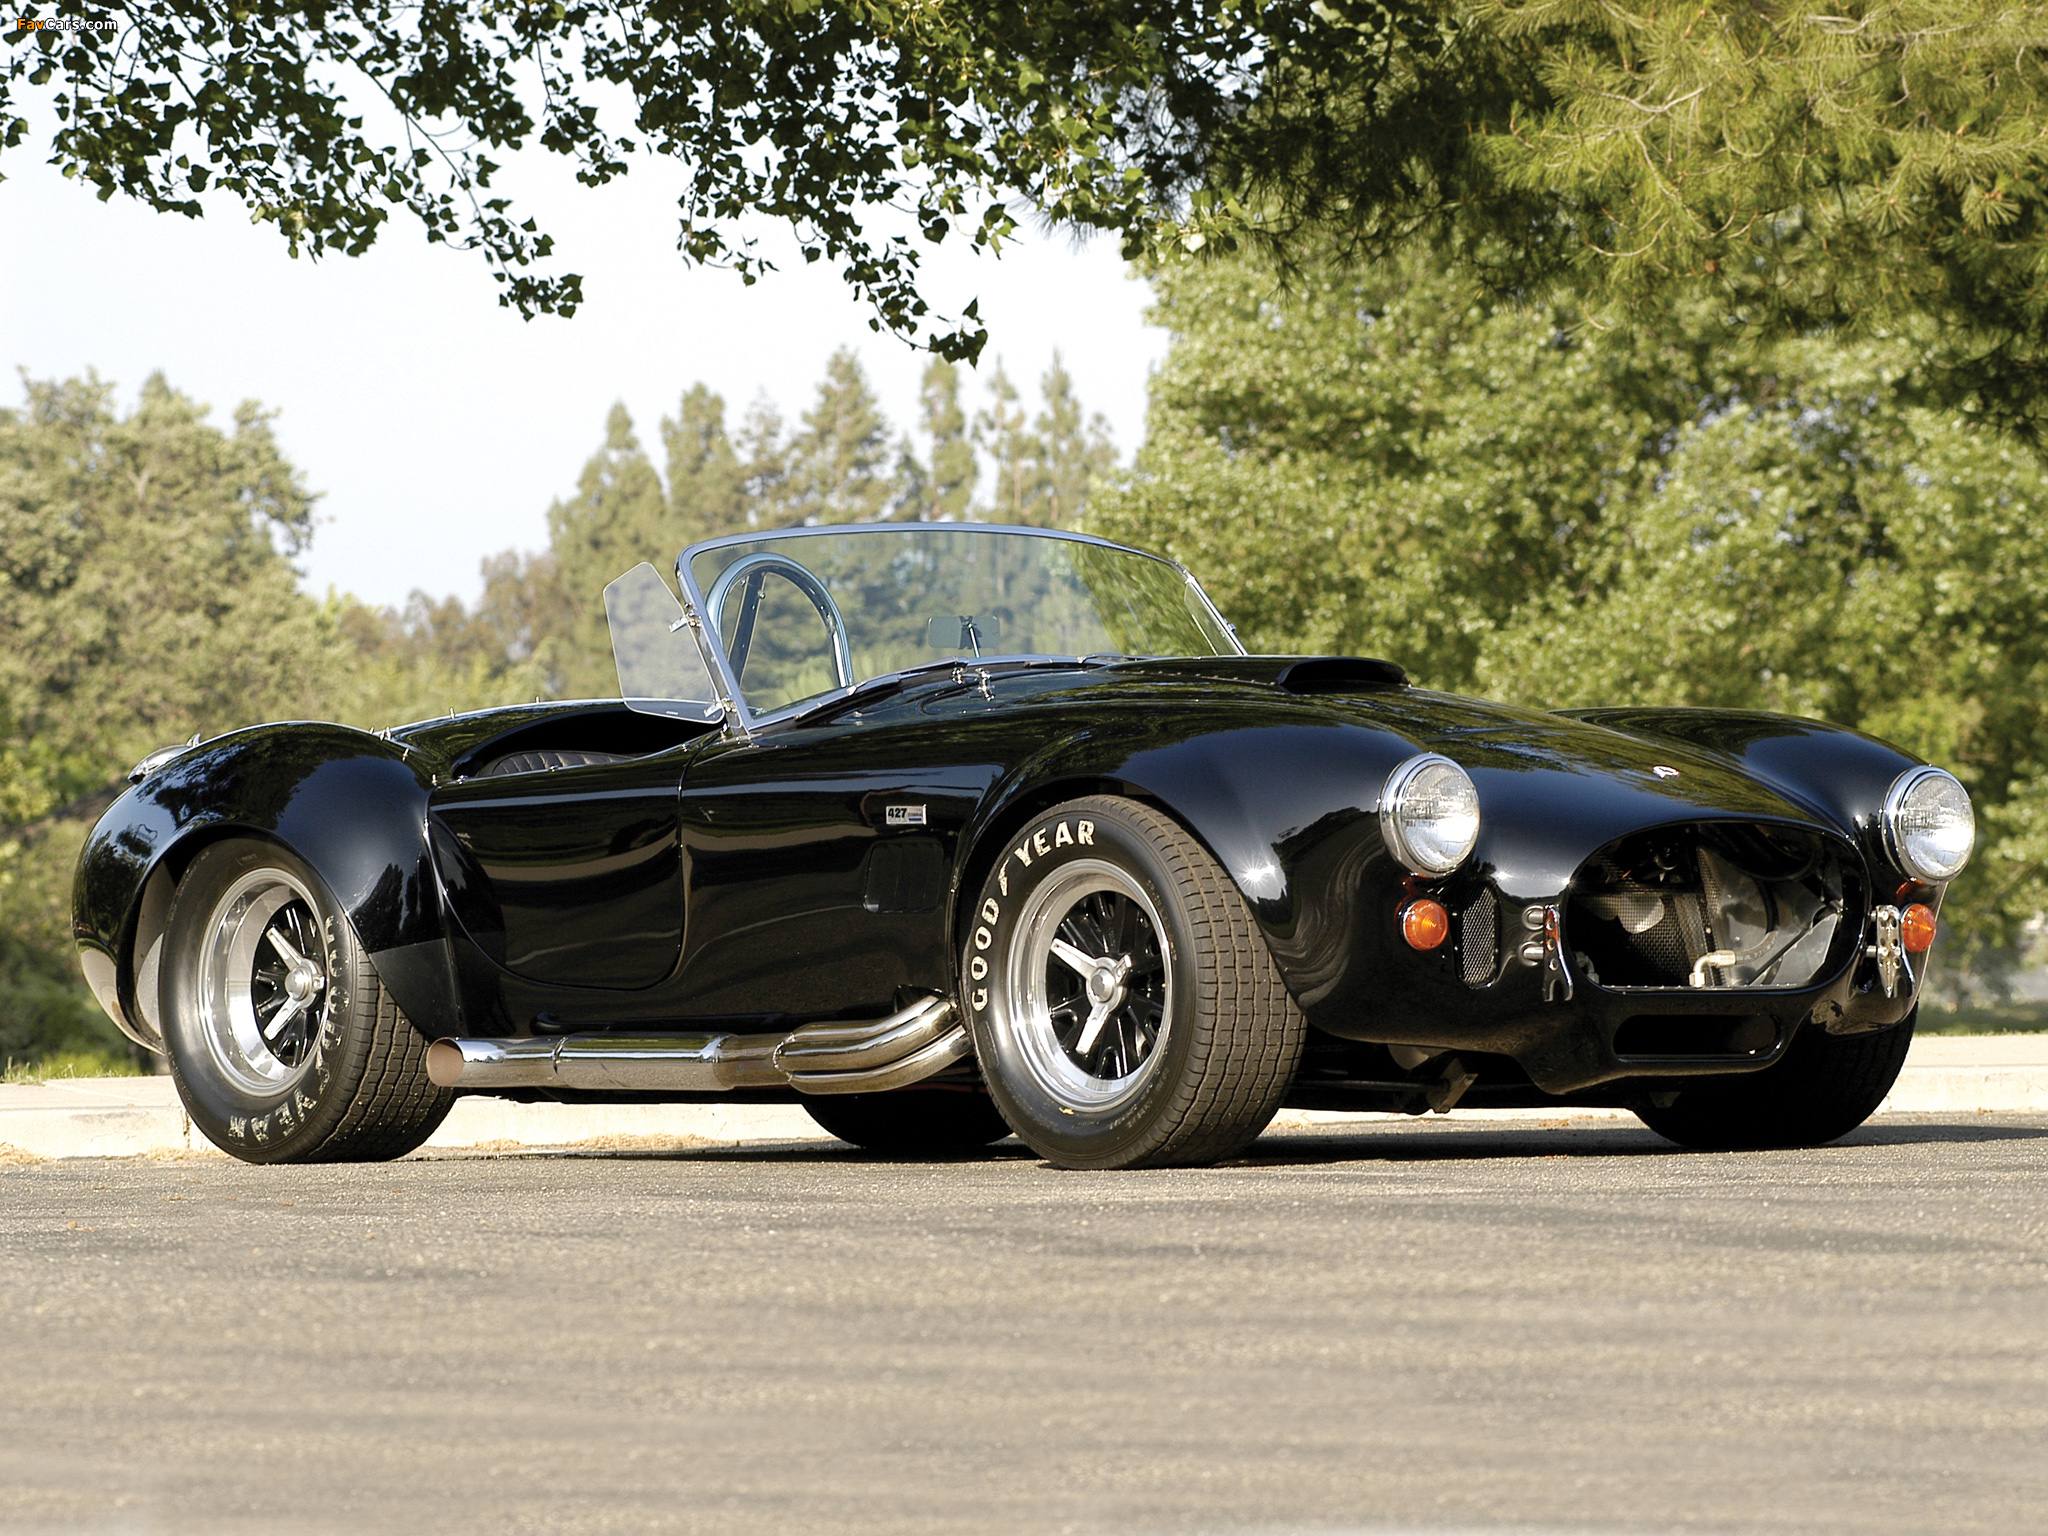 1966 Shelby Cobra 427 Wallpaper Collection.